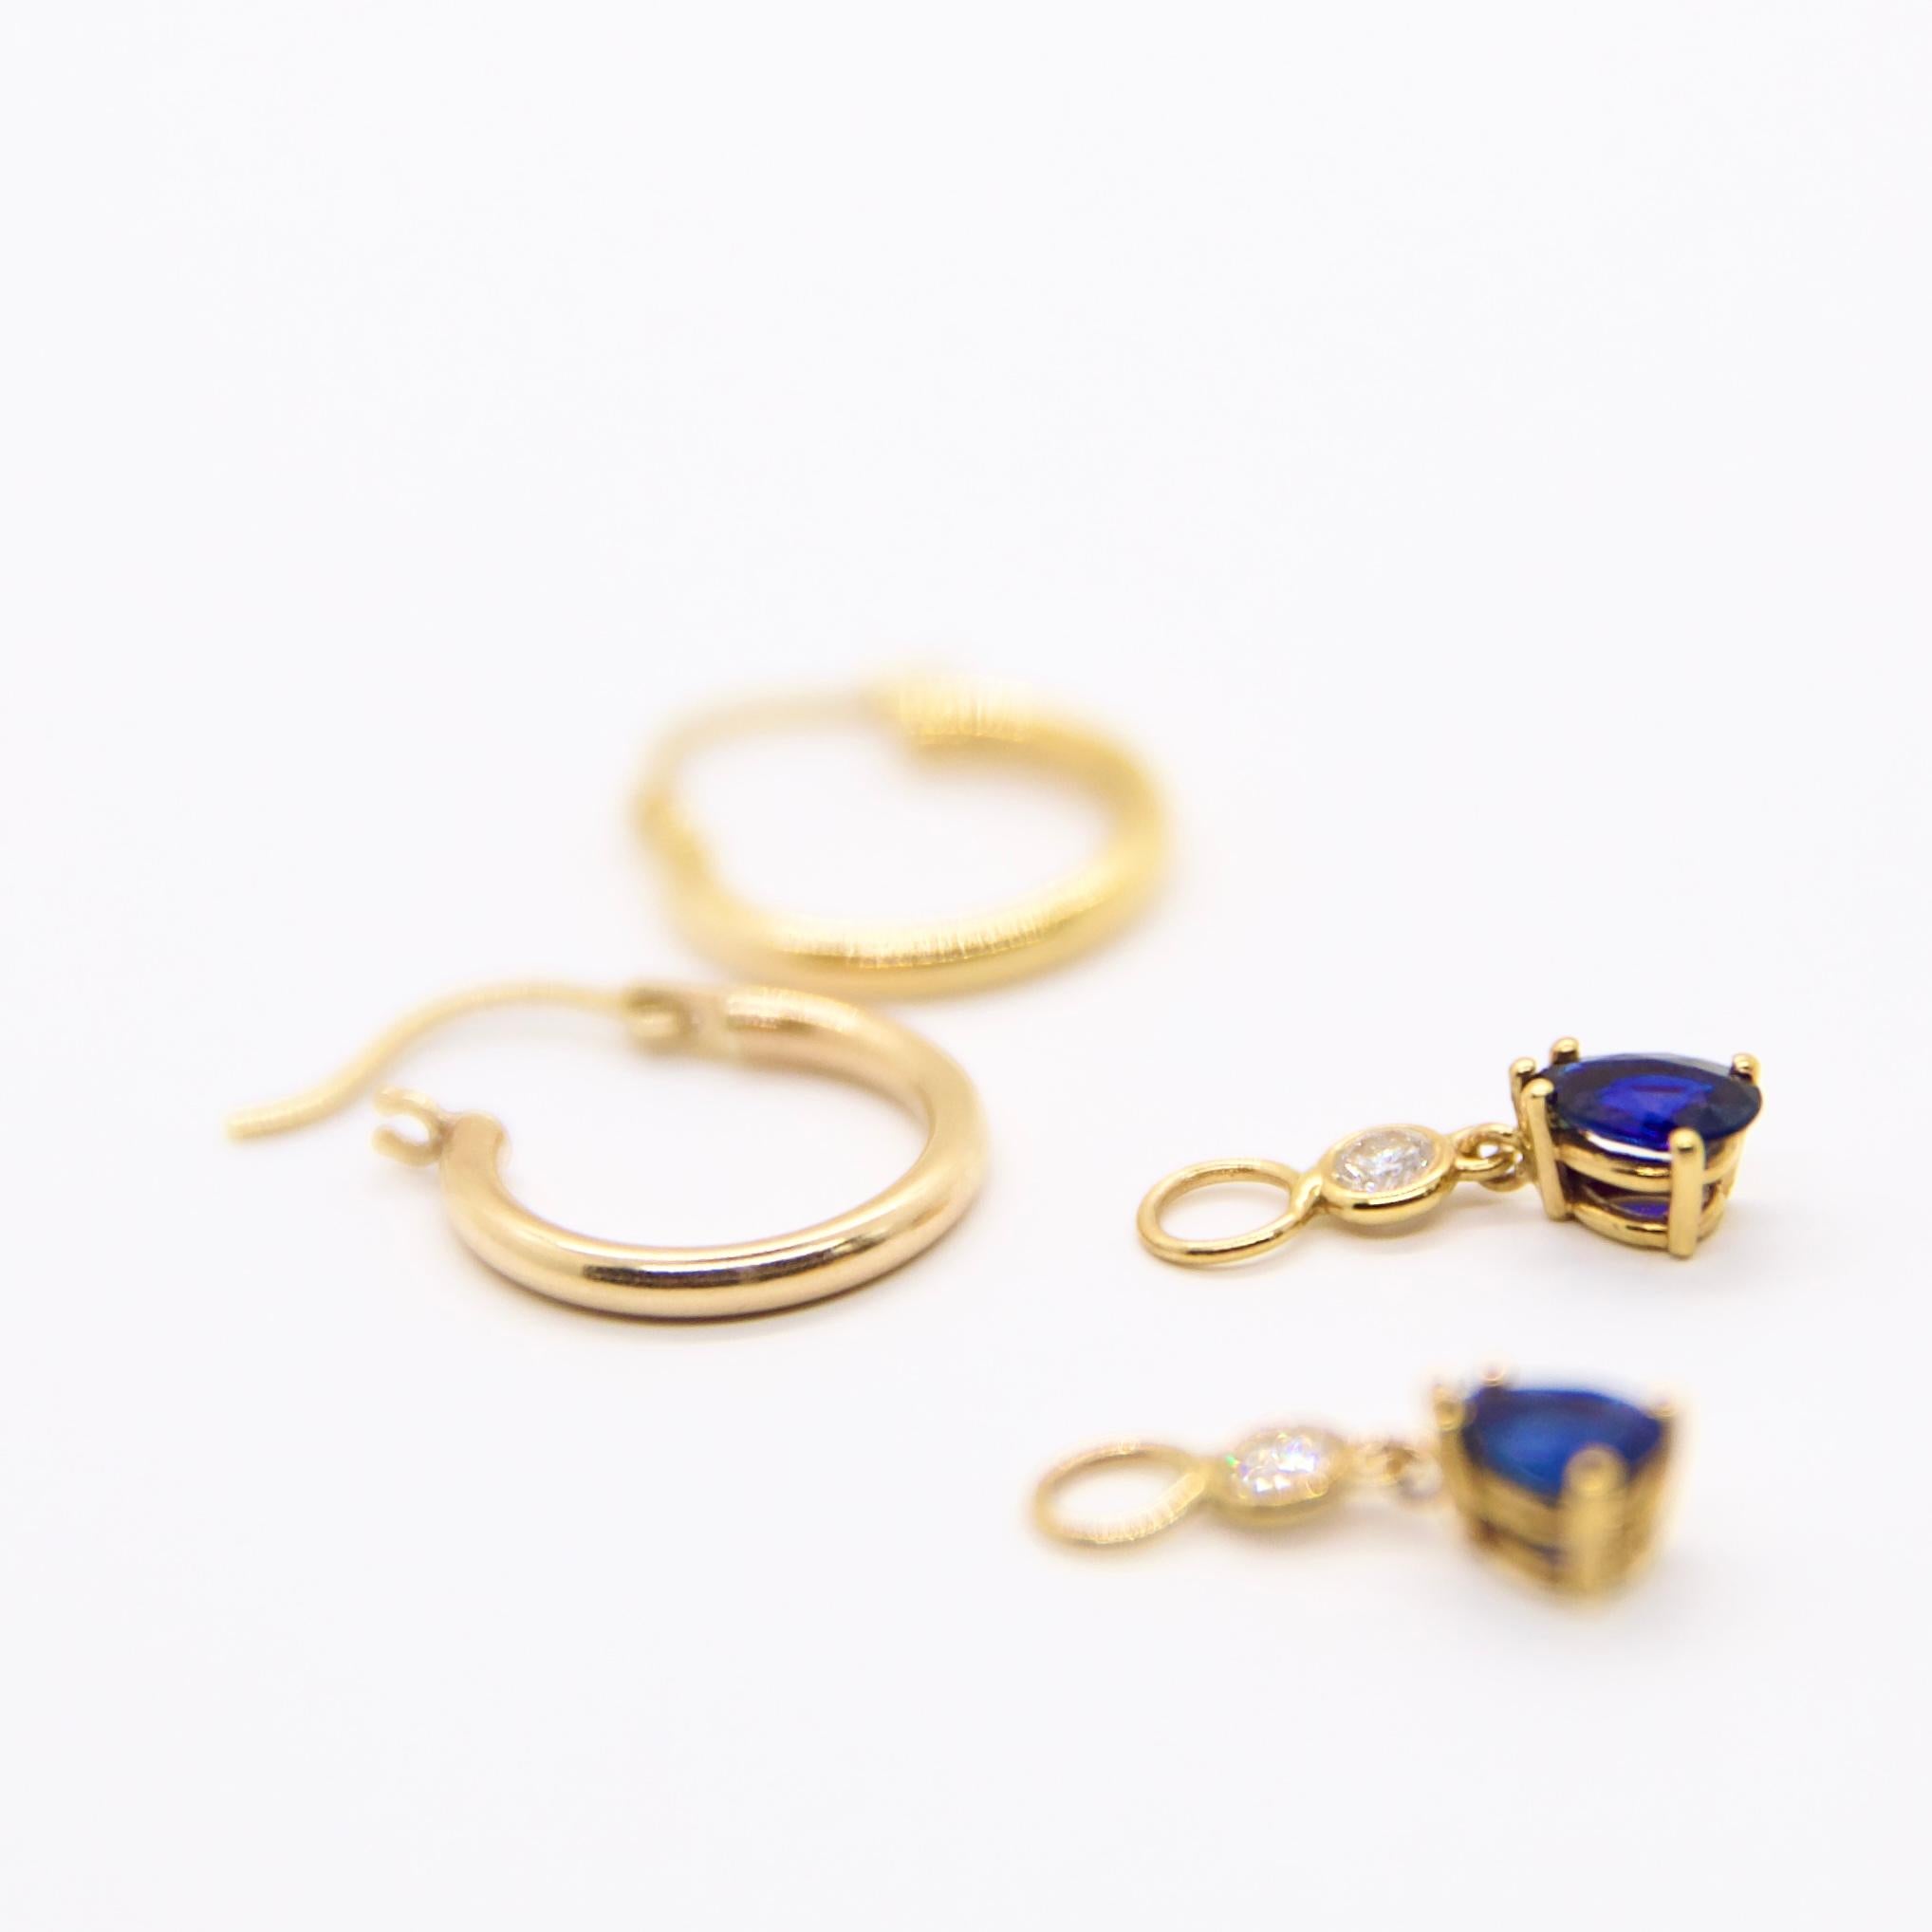 - Pair of  pear shaped sapphire (6x4mm) 0.60ct each, 1.20 Carat total weight.

- Round GHSI1 quality brilliant cut diamond set in a bezel: 0.05ct each (total weight: 0.10ct)

- Length: 1/2 inch 

- Handcrafted in a 14k yellow gold

- Detachable 

-